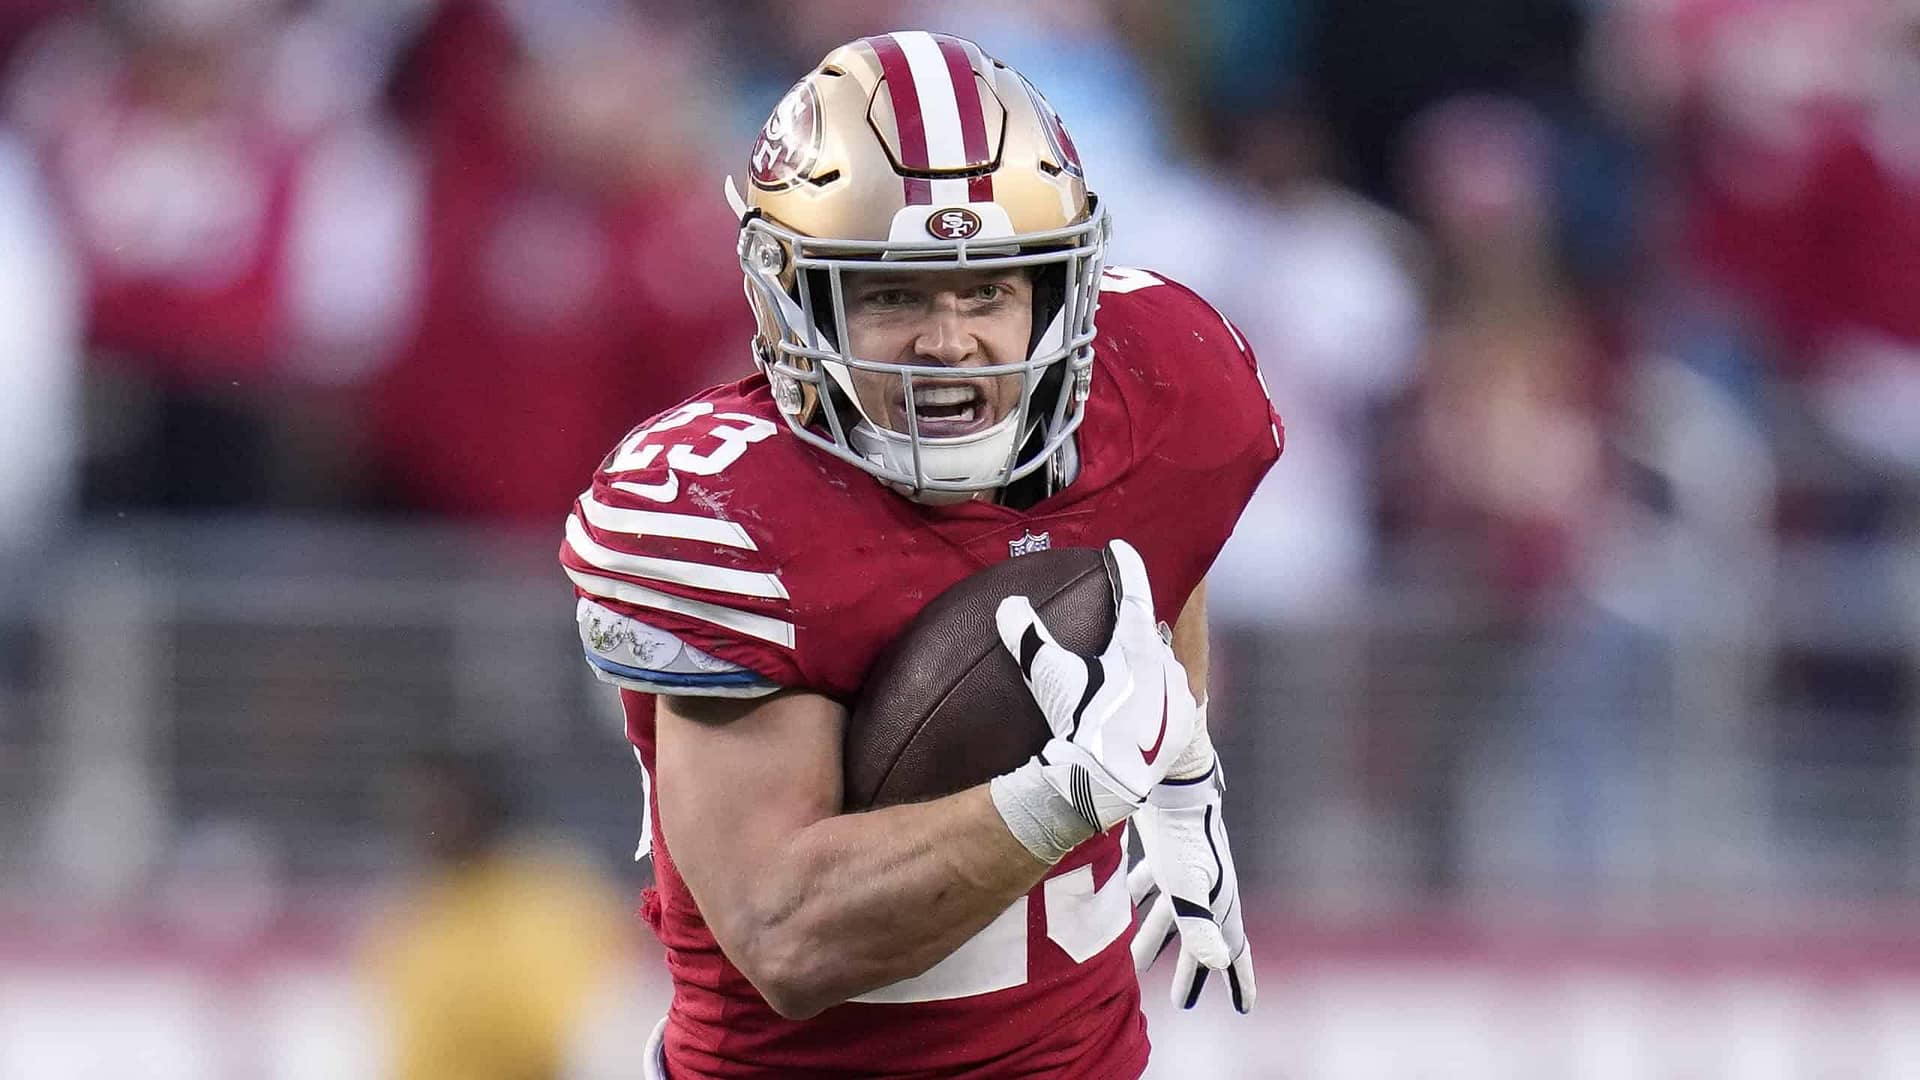 Let's dive into the Christian McCaffrey player prop odds for Super Bowl 58 as we look for the best Christian McCaffrey player prop pick...